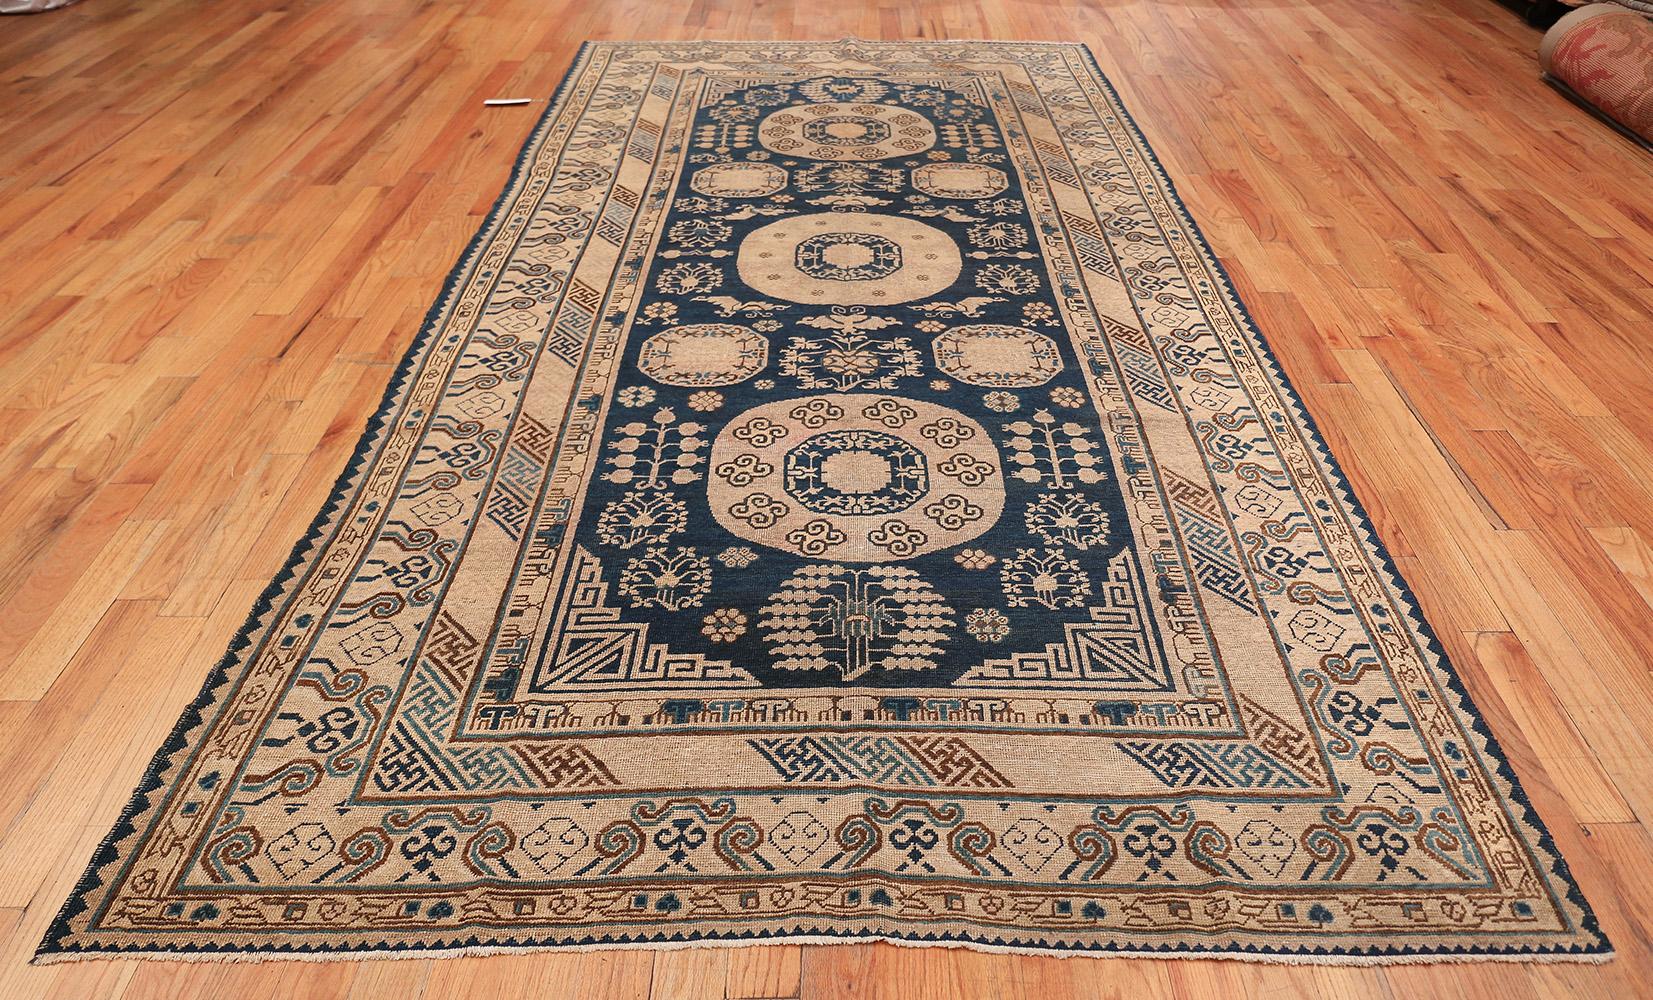 Antique Khotan, East Turkestan, circa late 19th century. Size: 6 ft x 12 ft 3 in (1.83 m x 3.73 m)

This breathtaking, earth-toned Khotan rug is the perfect touch for a nature-inspired or Oriental room design. Khotan is located in the Xinjiang